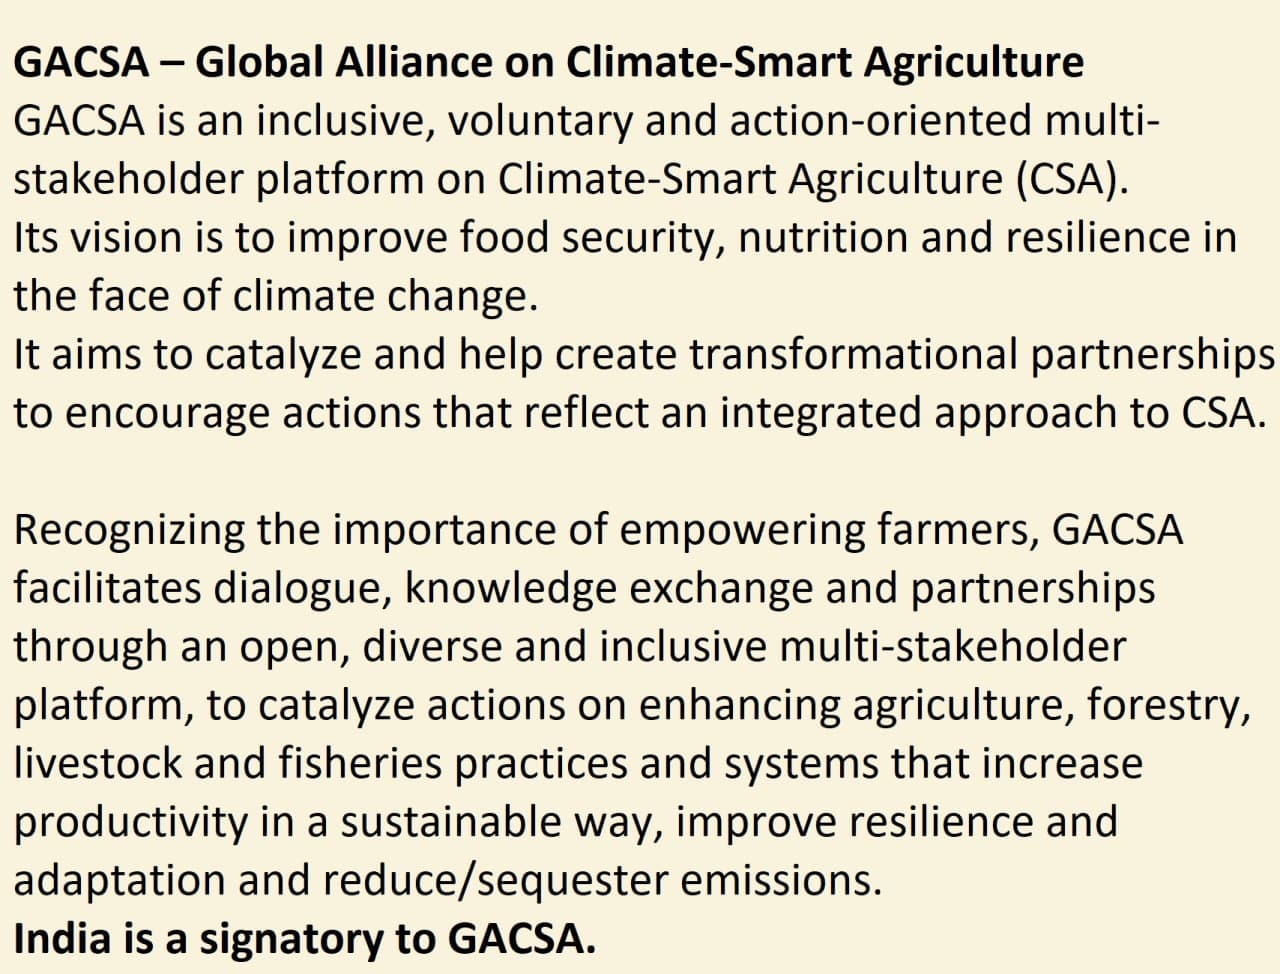 Climate smart agriculture- for sustainable agricultural growth in India • Need for sustainable fly ash management in India • Challenges of jute industry in India • Cryokarst • PM kusum Yojana • Soil Health Management • Rain water harvesting (RWH) systems and sustainable development in industrial land use • Places in news